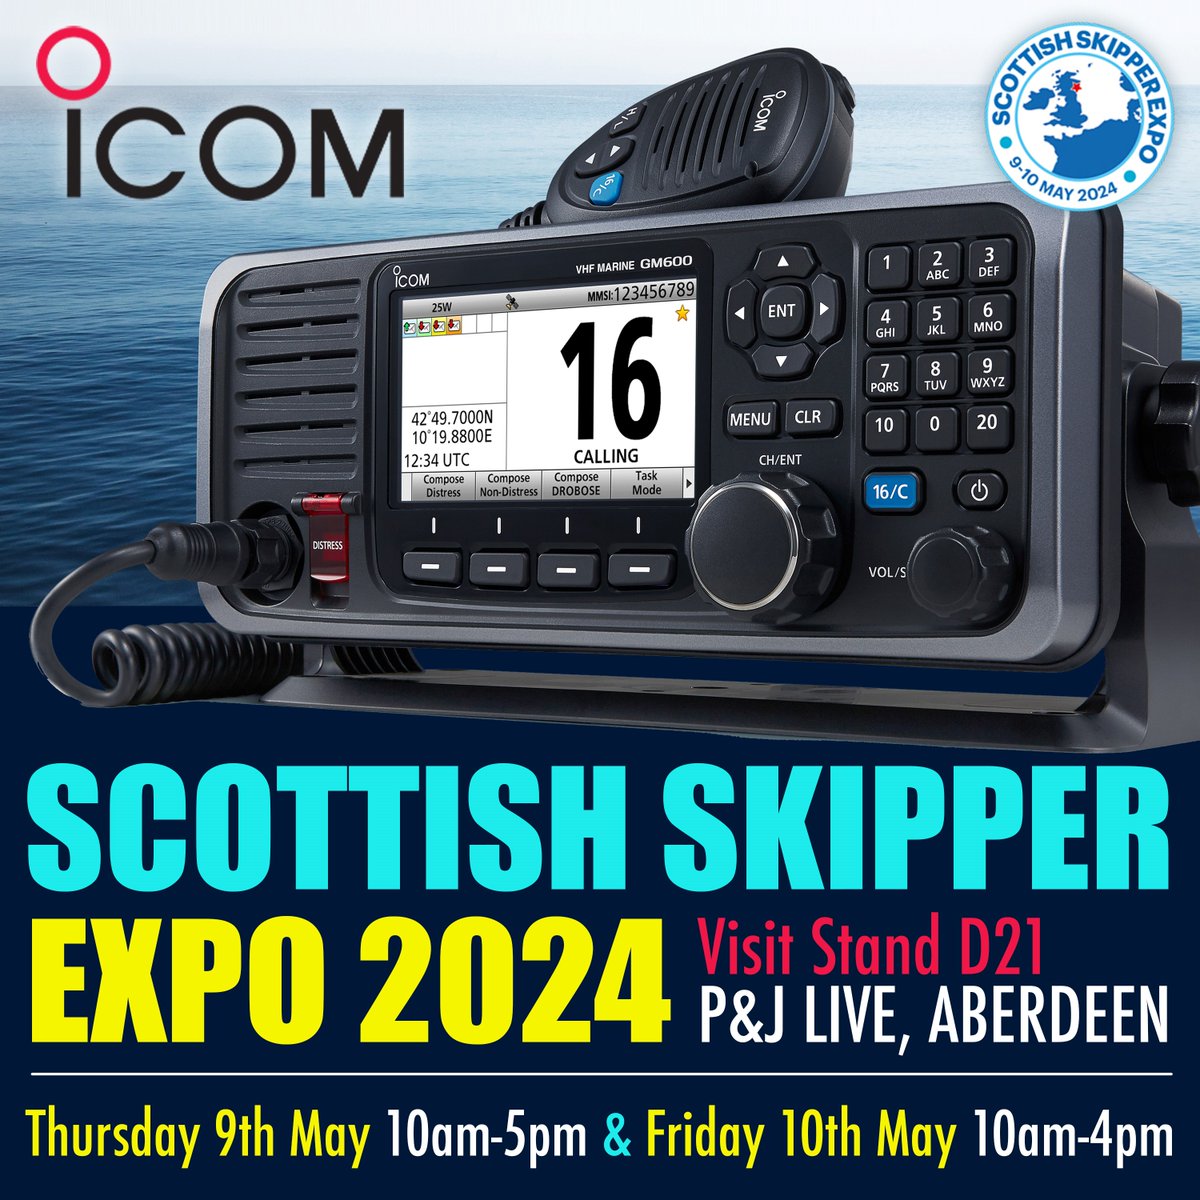 The Scottish @SkipperExpo 2024 Aberdeen kicks off tomorrow. If you need a VHF radio, navigational equipment, or other communication equipment for your vessel(s), come and speak to Chris on the ICOM stand D21. Can't make the show? Browse our products at icomuk.co.uk/Marine_Radio